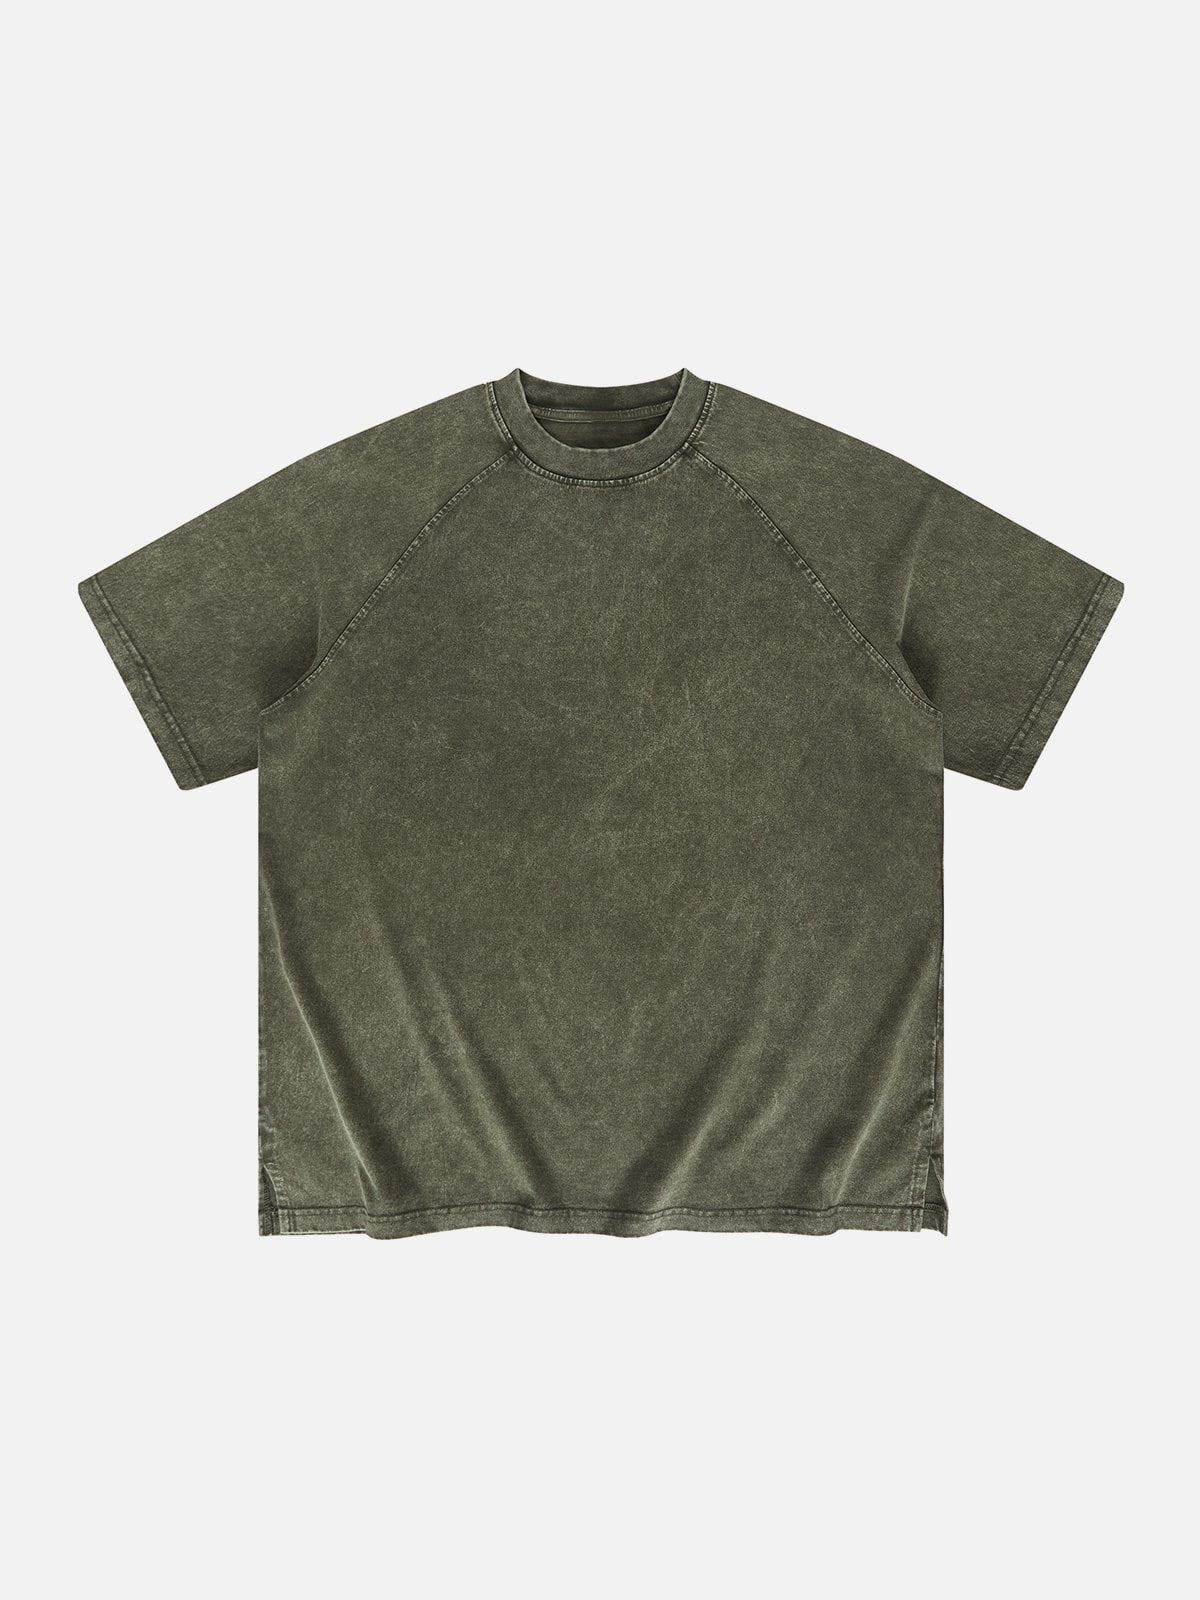 Sneakerland™ - Solid Washed Essential Cotton Tee